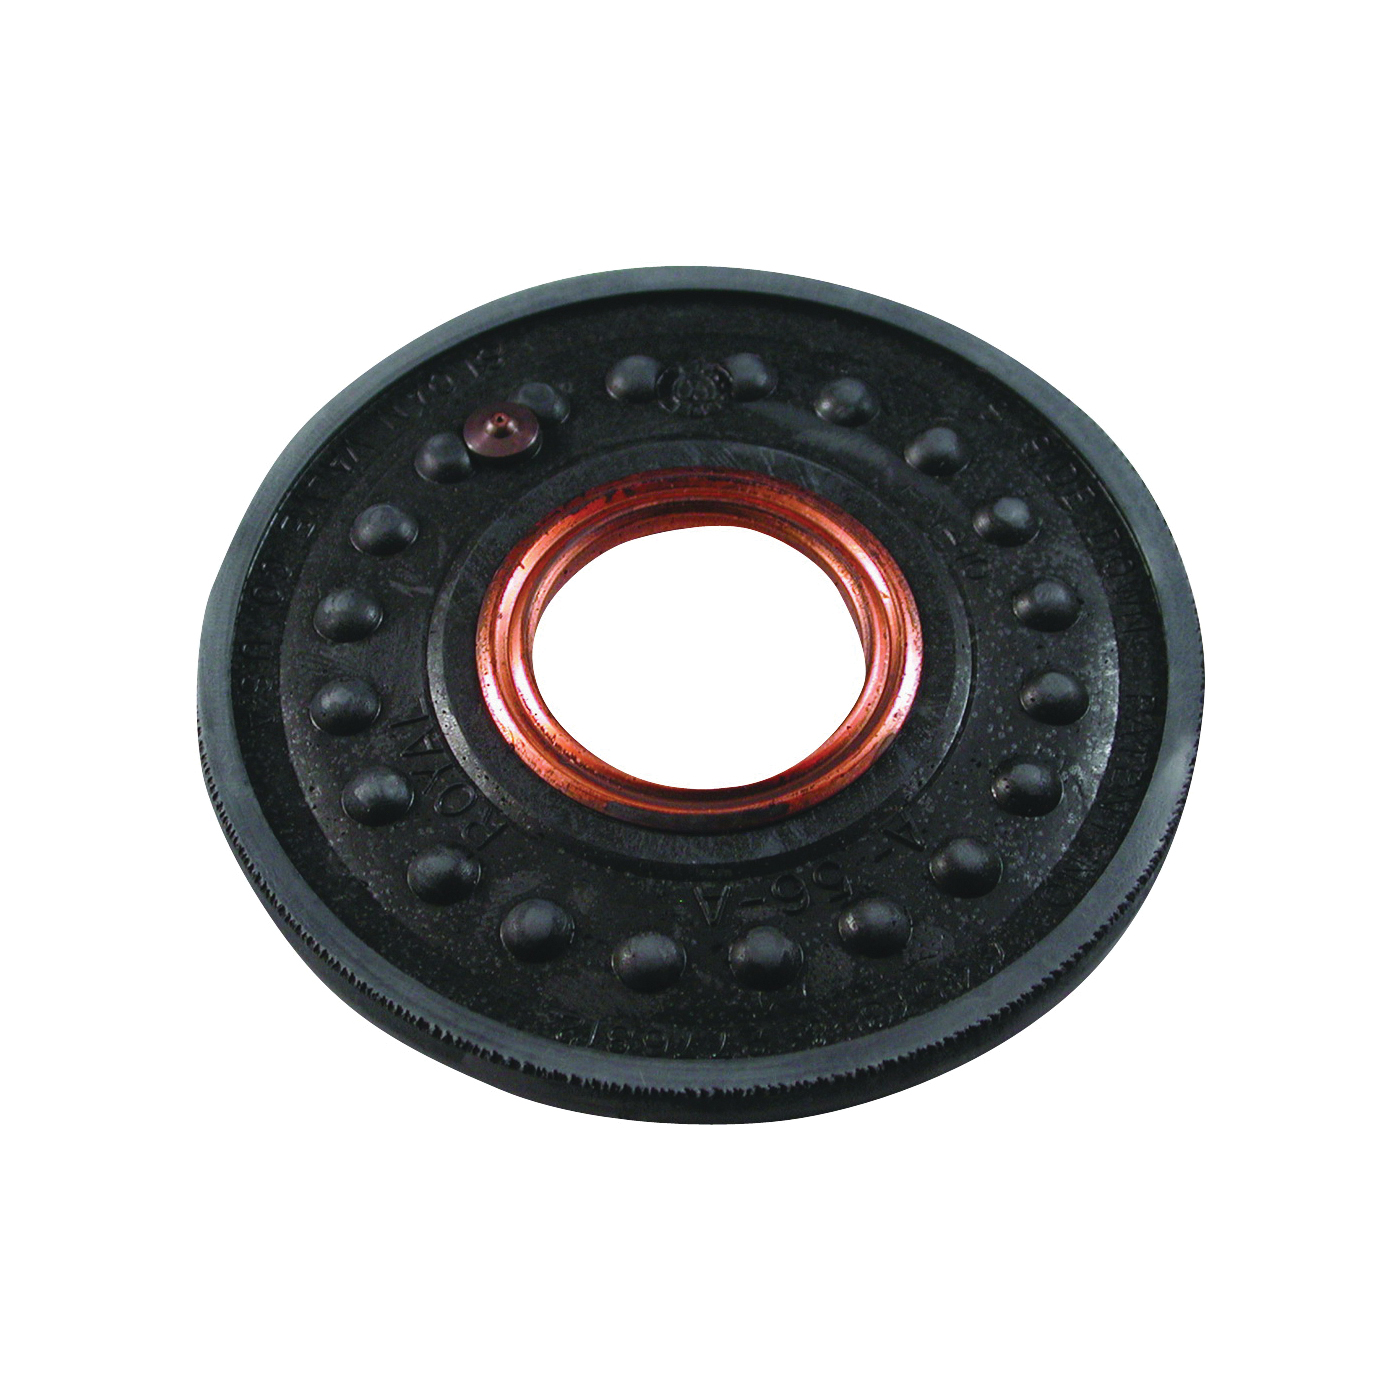 72524 Flush Valve Diaphragm with Ring, Copper, For: Sloan Regal and Royal Valves